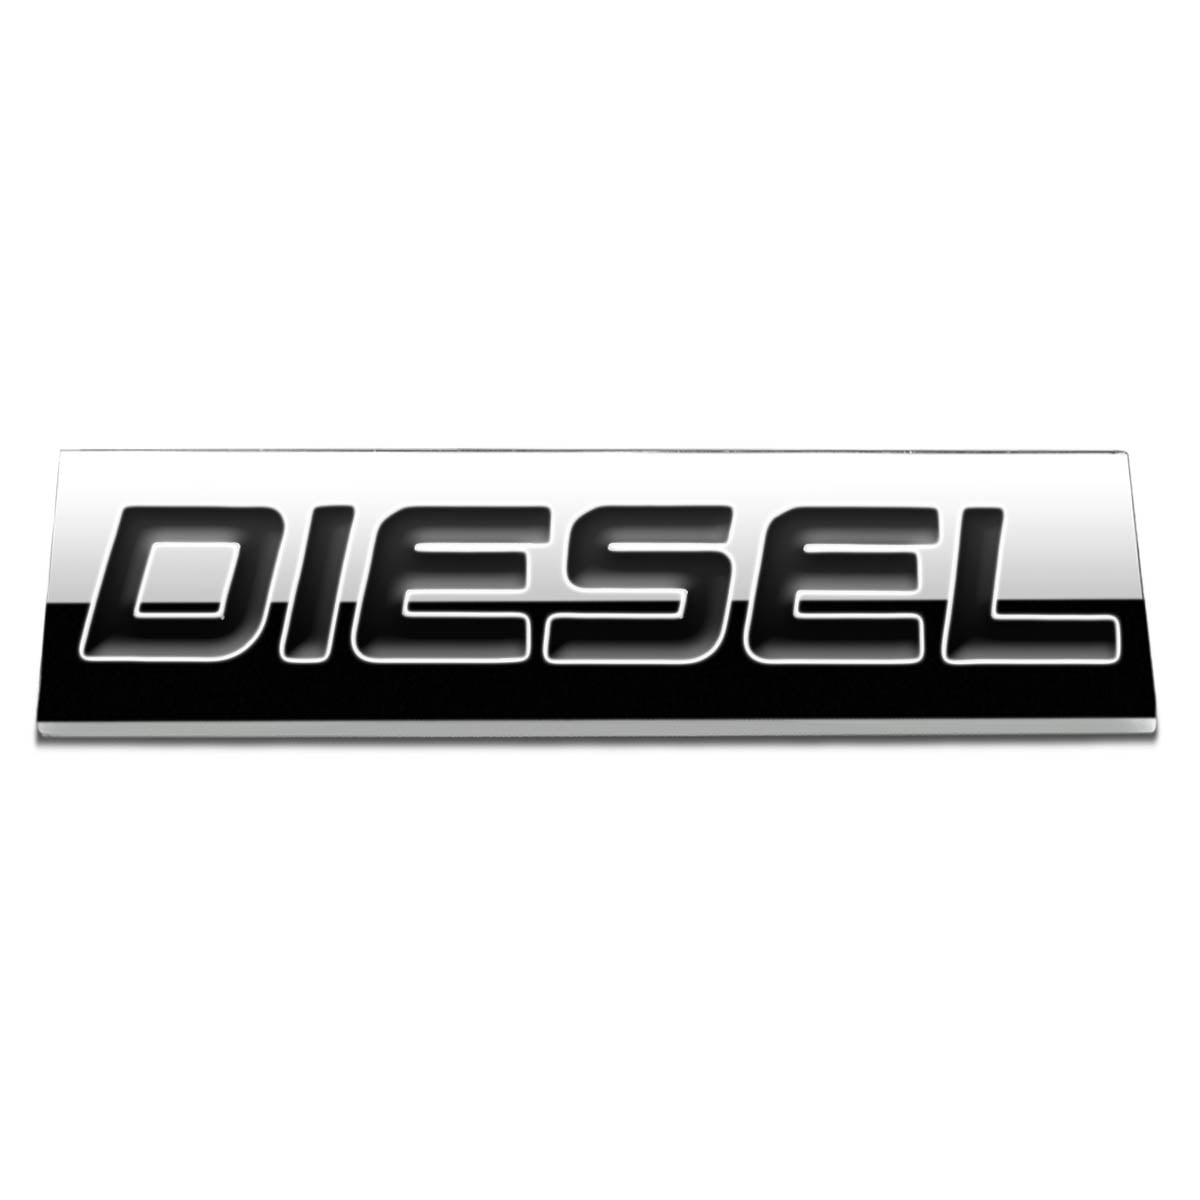 Diesel Silver Text with Black Surround Grille Badge 